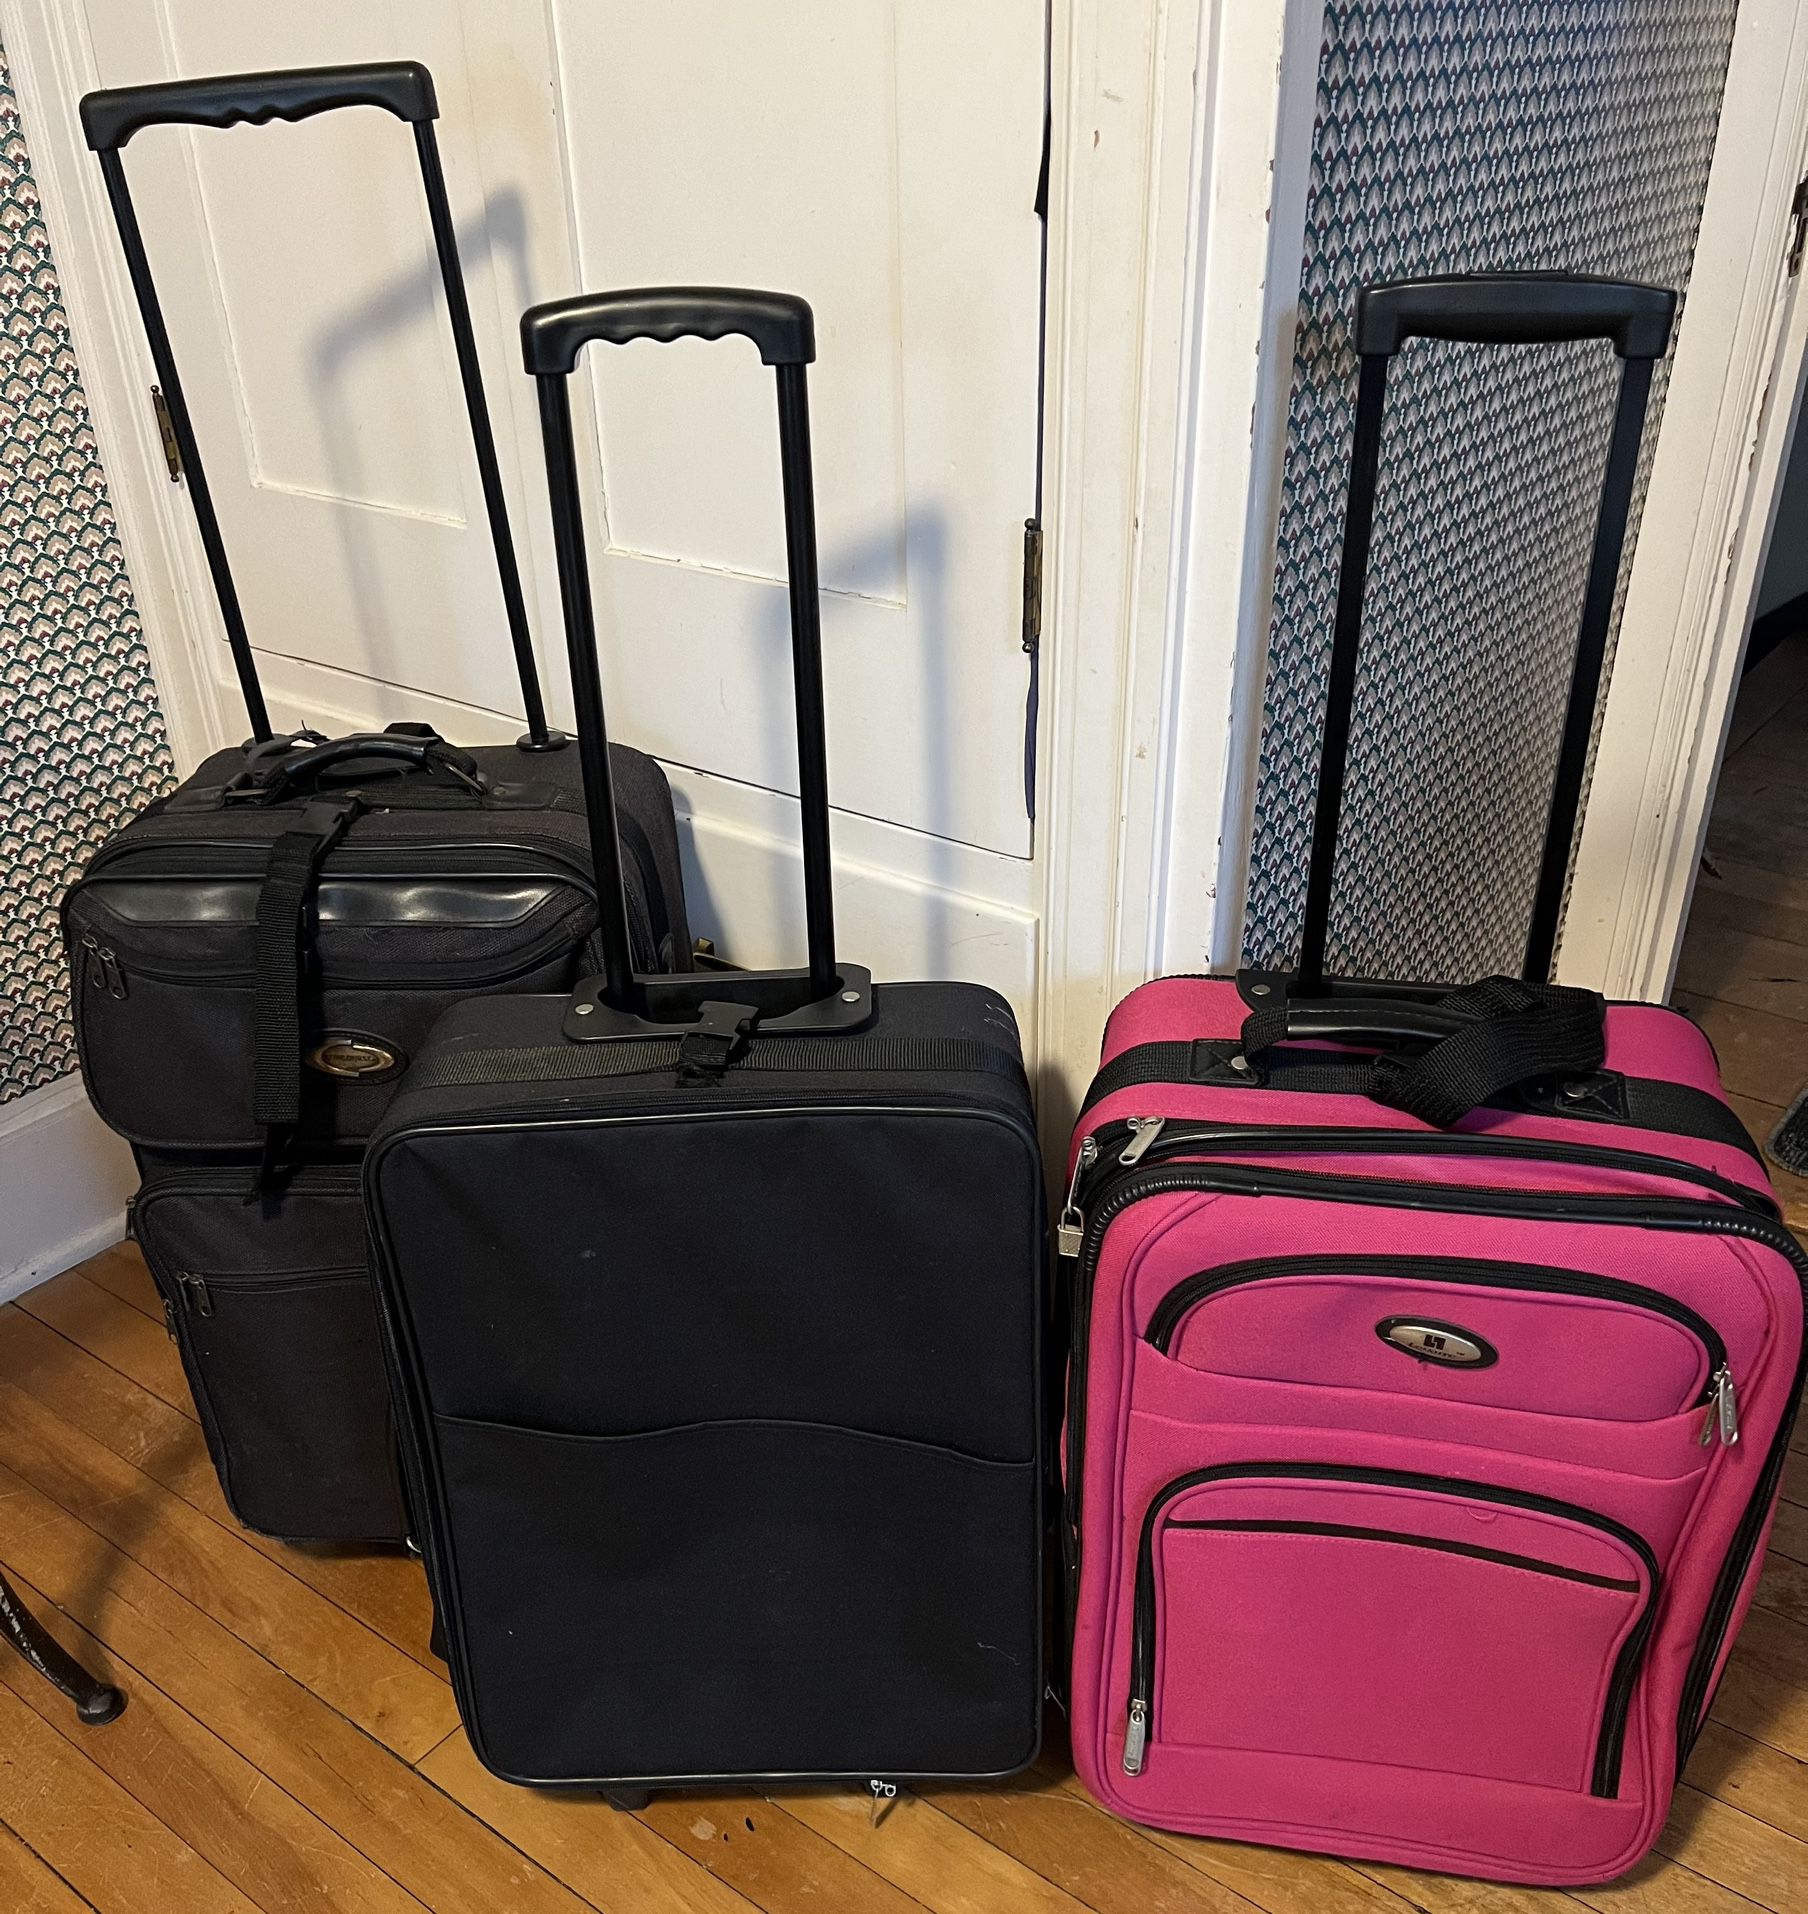 (3) Pieces of Rolling Luggage - Take 2 or All